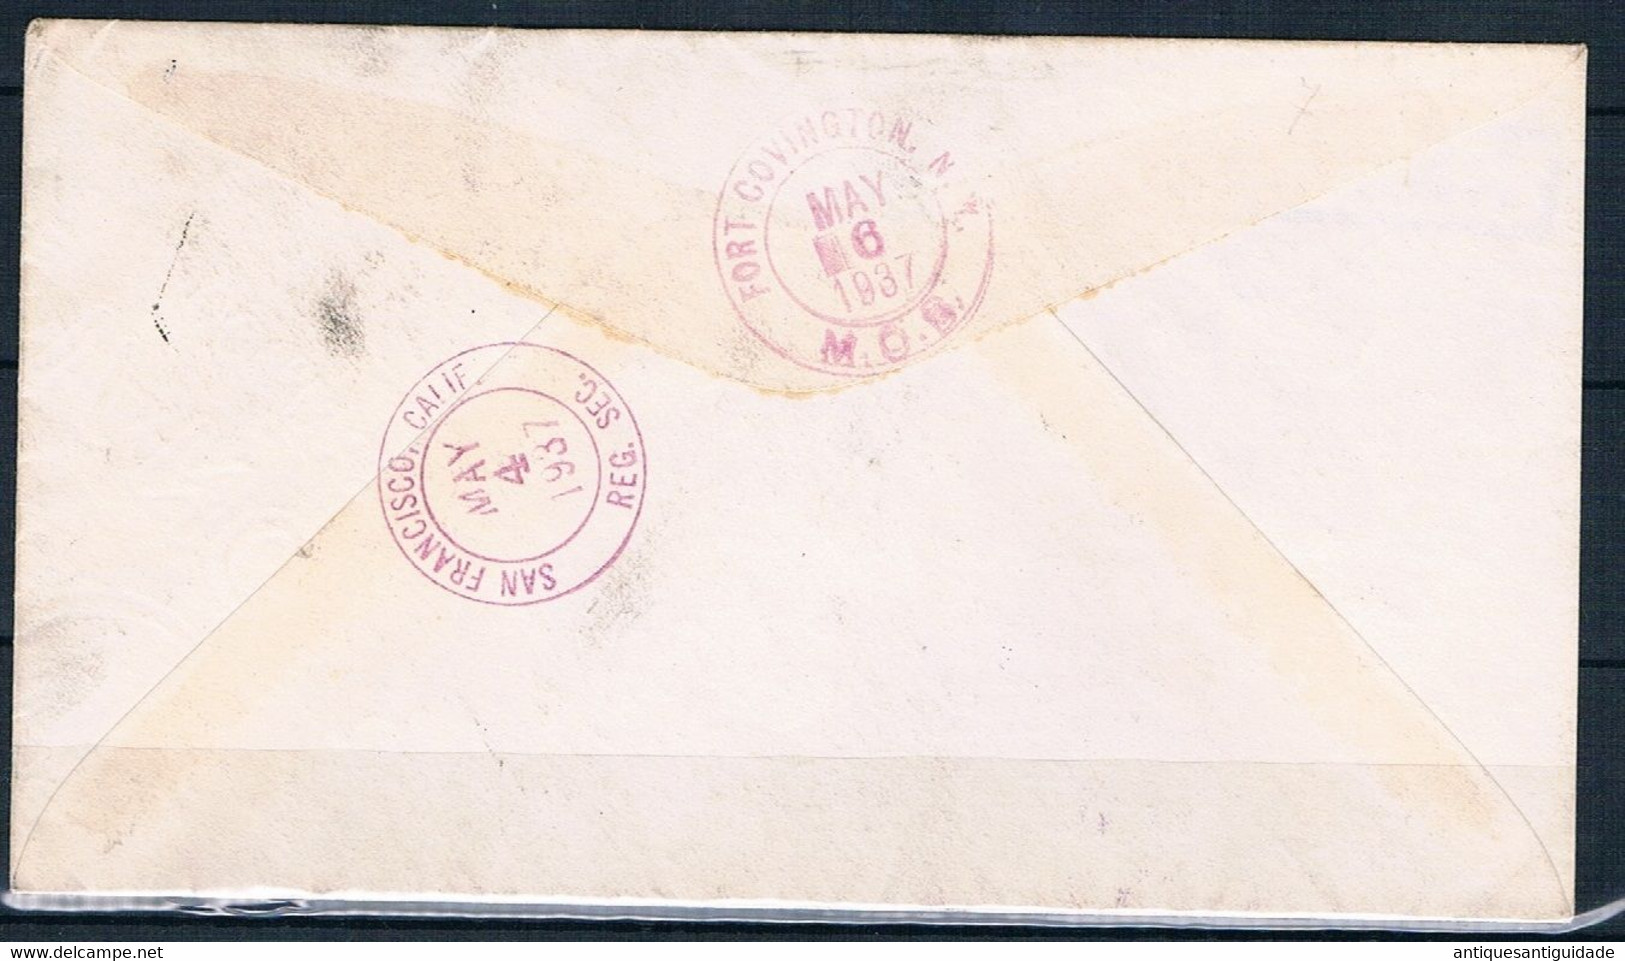 1937 FDC  Macao Central - First Flight Trans-Pacific Mail –  Macao To San Francisco - Franklin Vermont - Luftpost